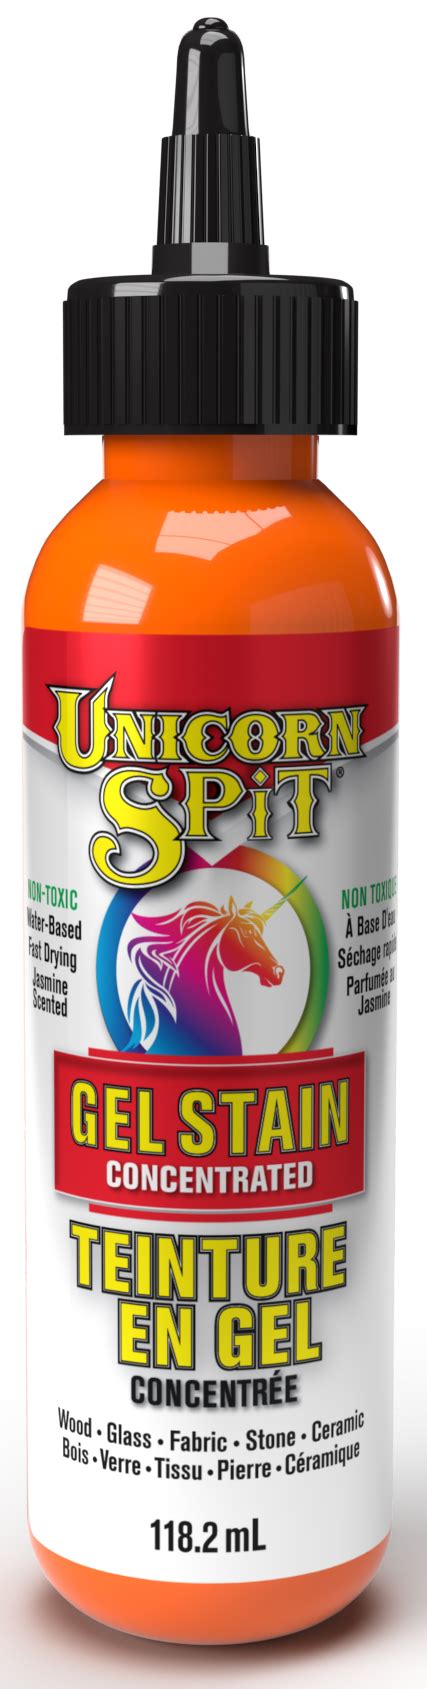 Unicorn Spit In The Home And On The Job Products